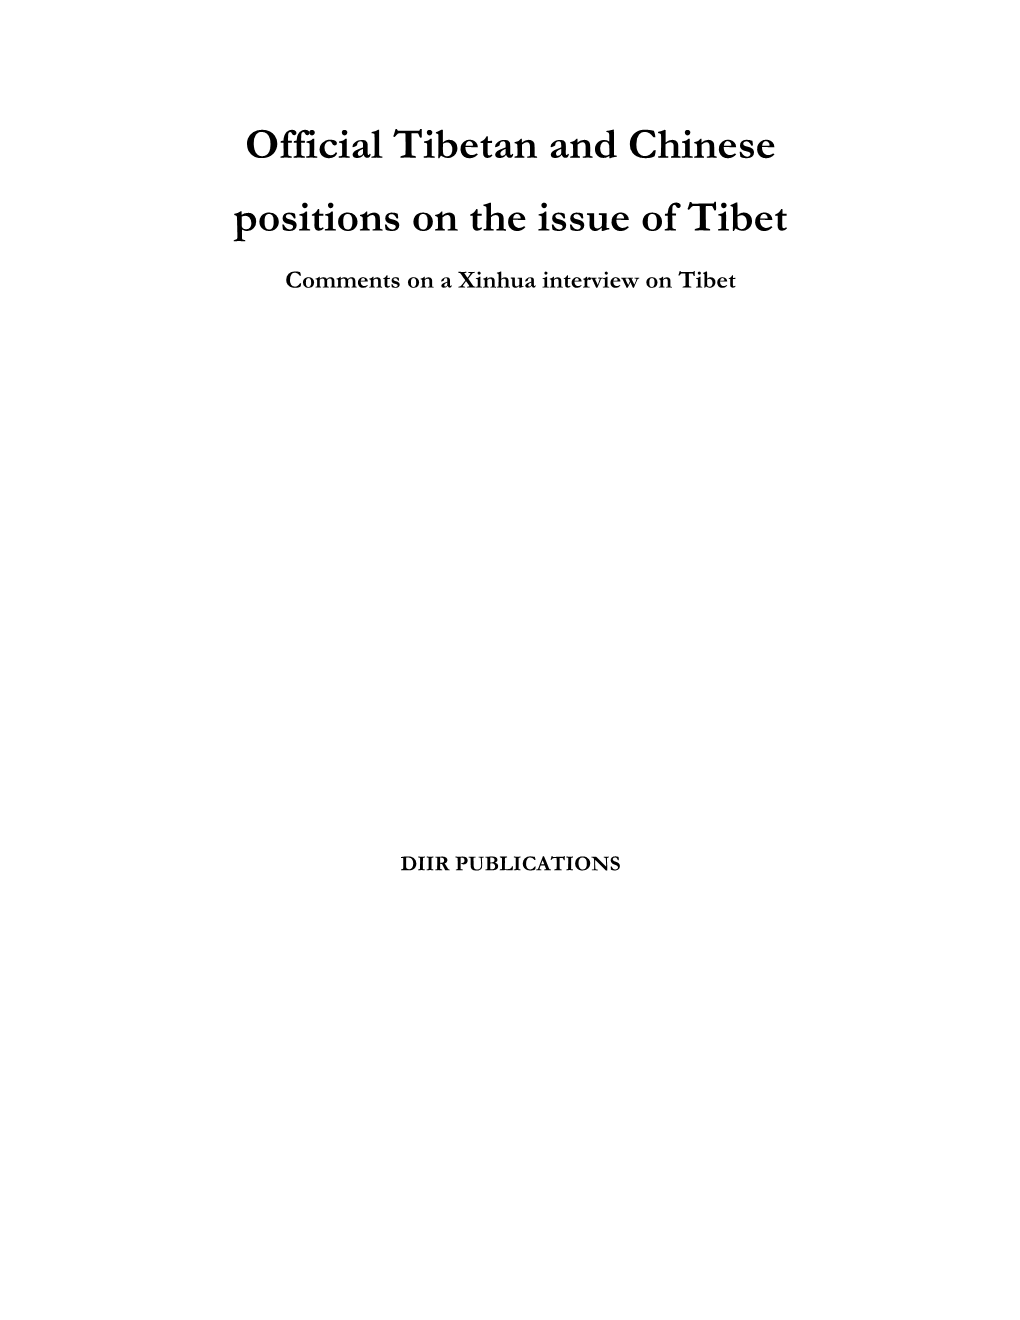 Official Tibetan and Chinese Positions on the Issue of Tibet (1994)